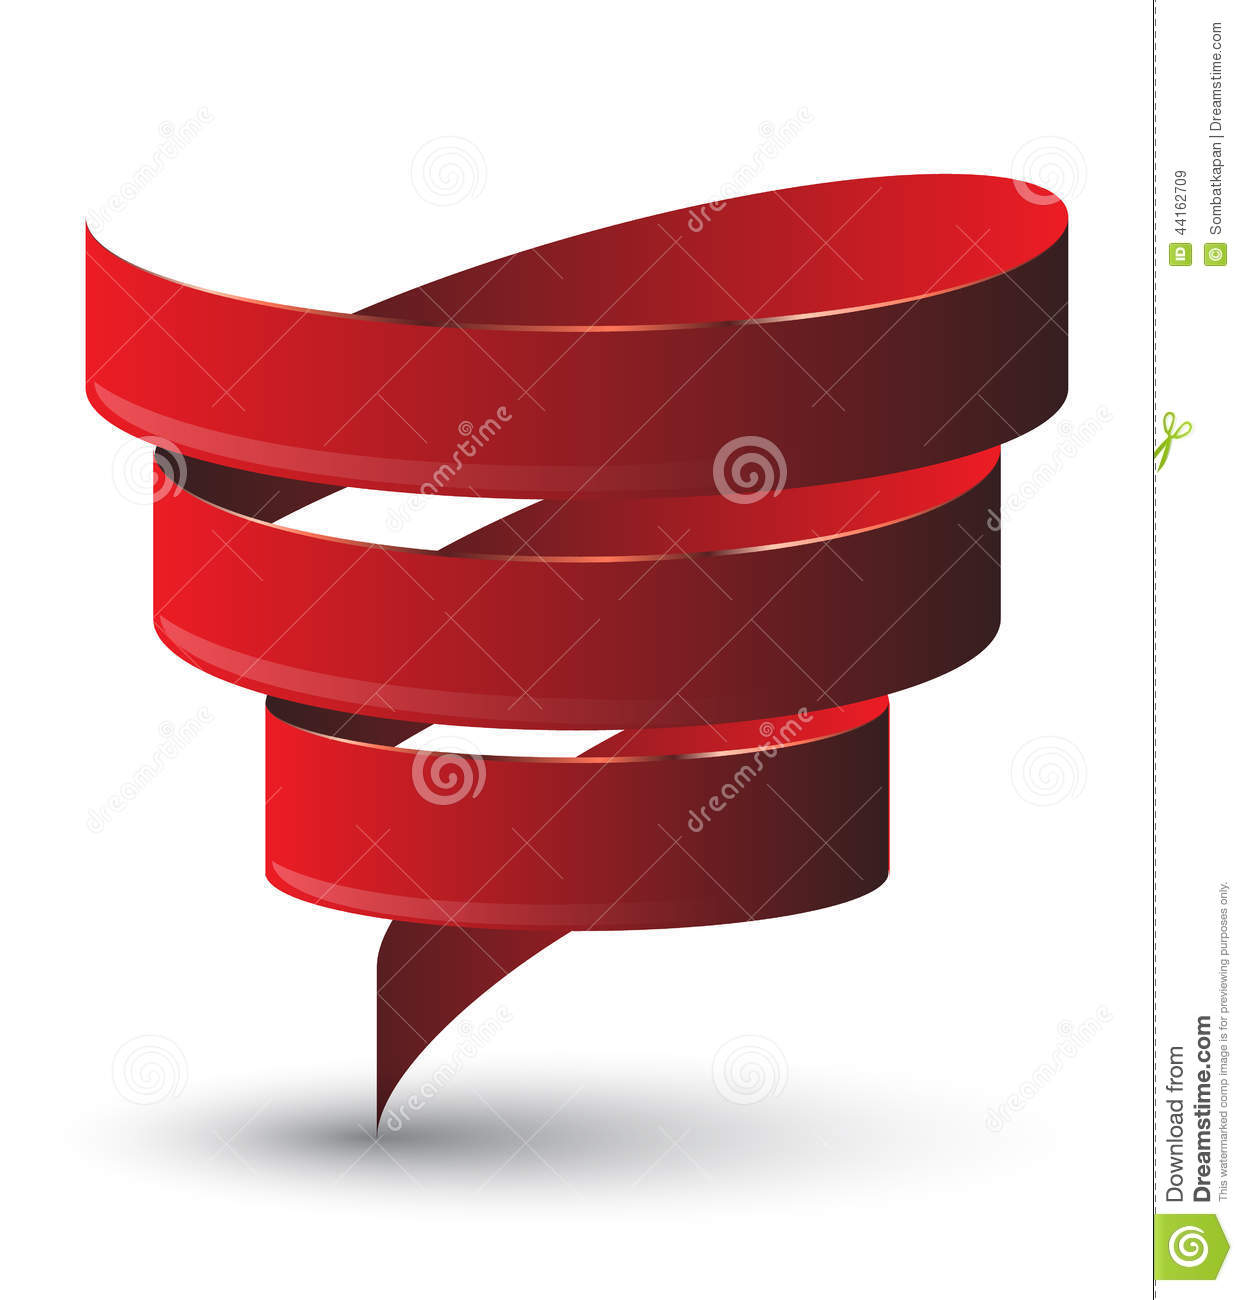 Red Ribbon Twist  Stock Vector   Image  44162709